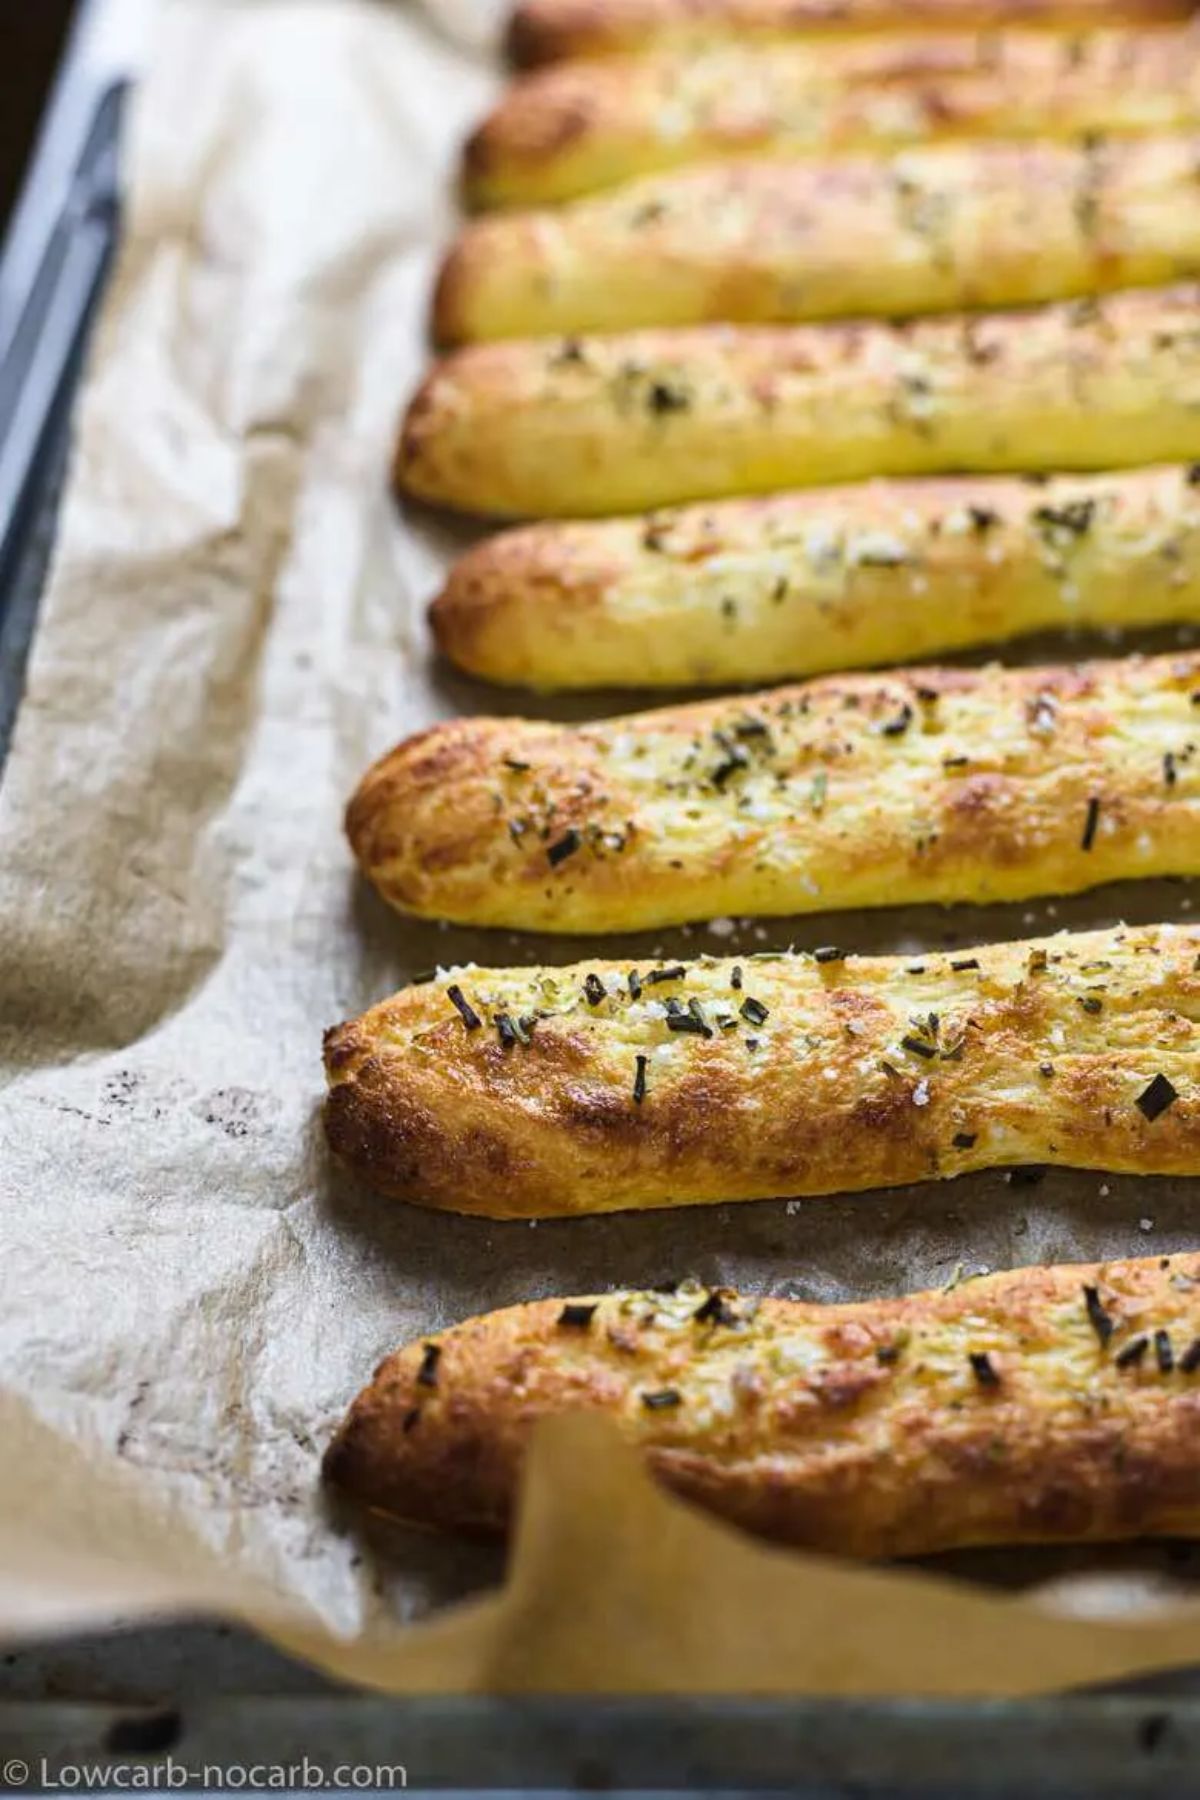 On a baking tray and sheet of baking paper are 8 long sticks of bread with herbs sprinkled on top